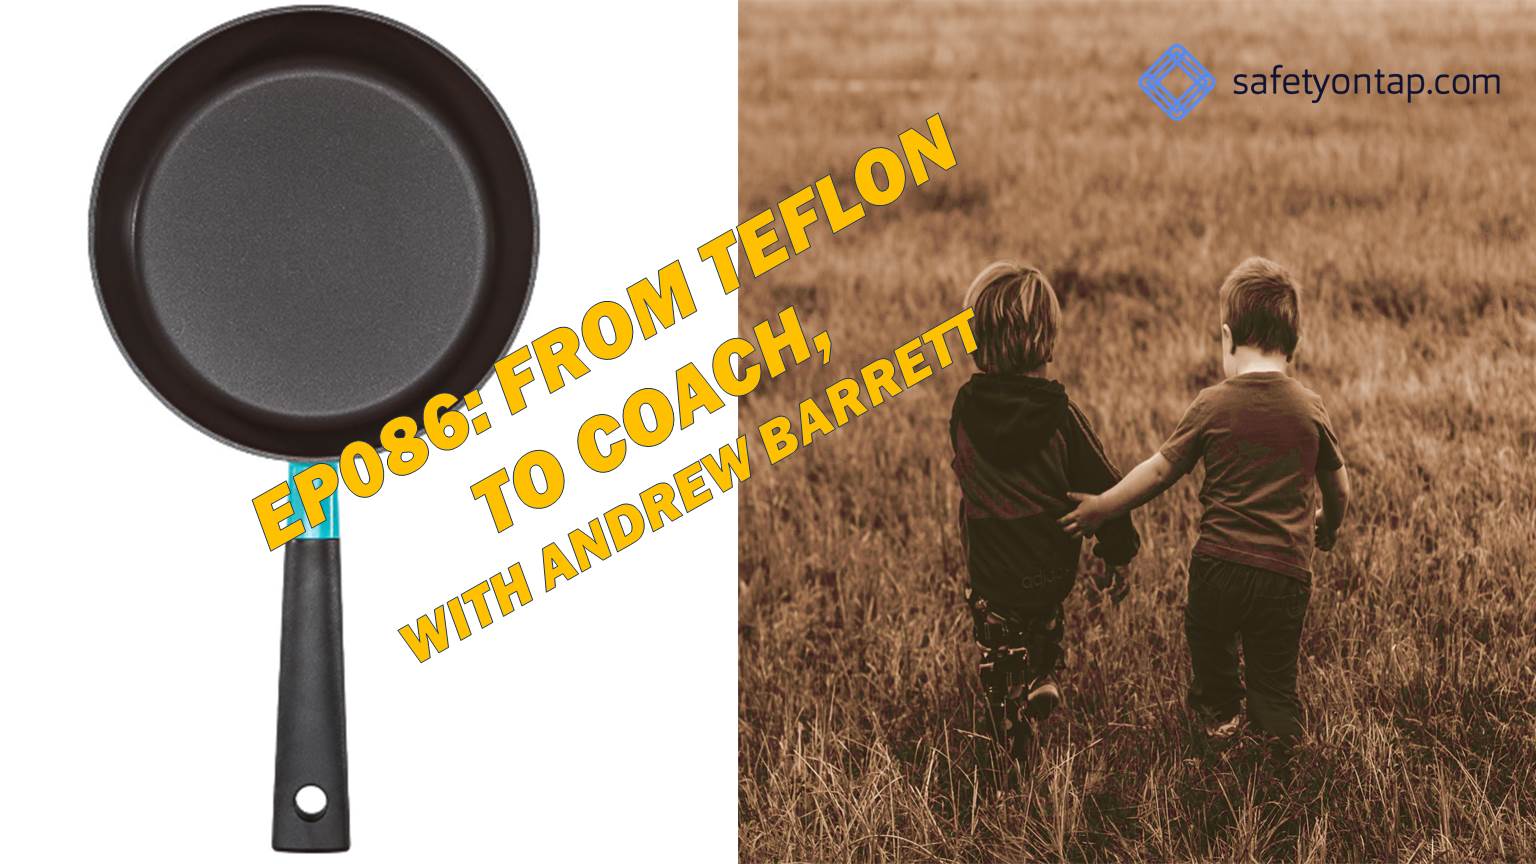 Ep086: From Teflon to Coach, with Andrew Barrett